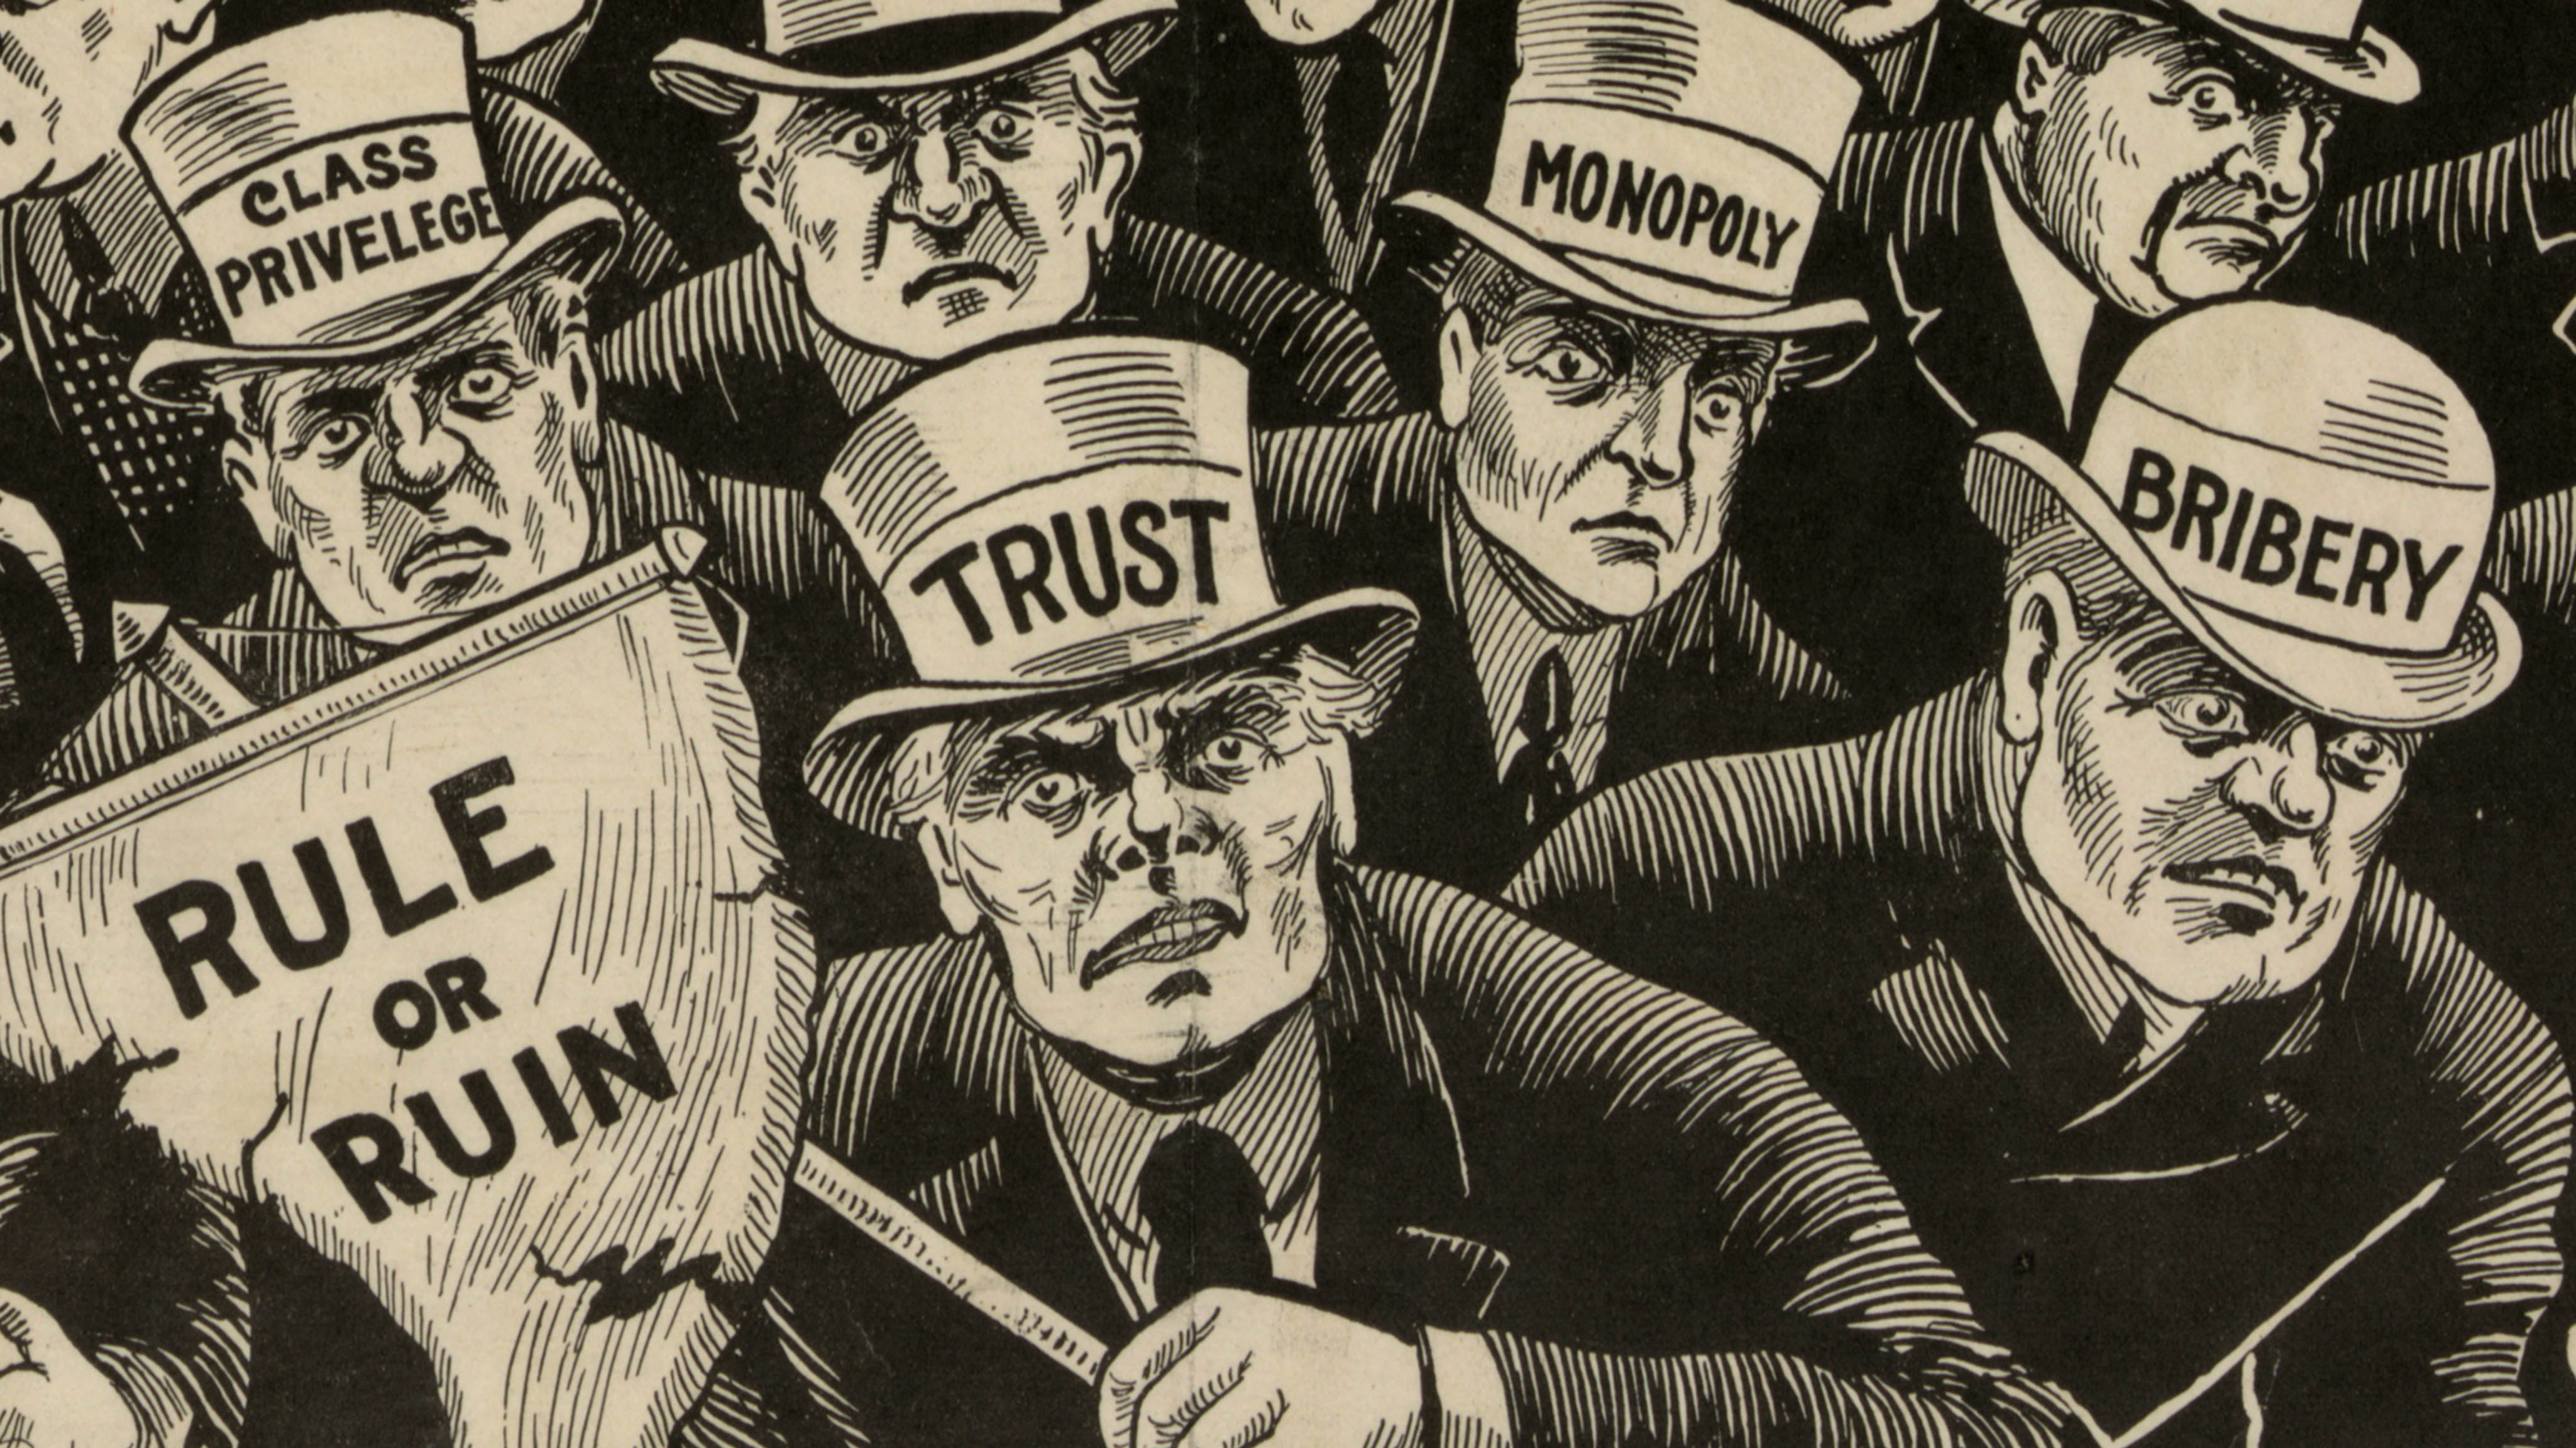 Robber Barons: Definition, Significance, Criticism, and Examples